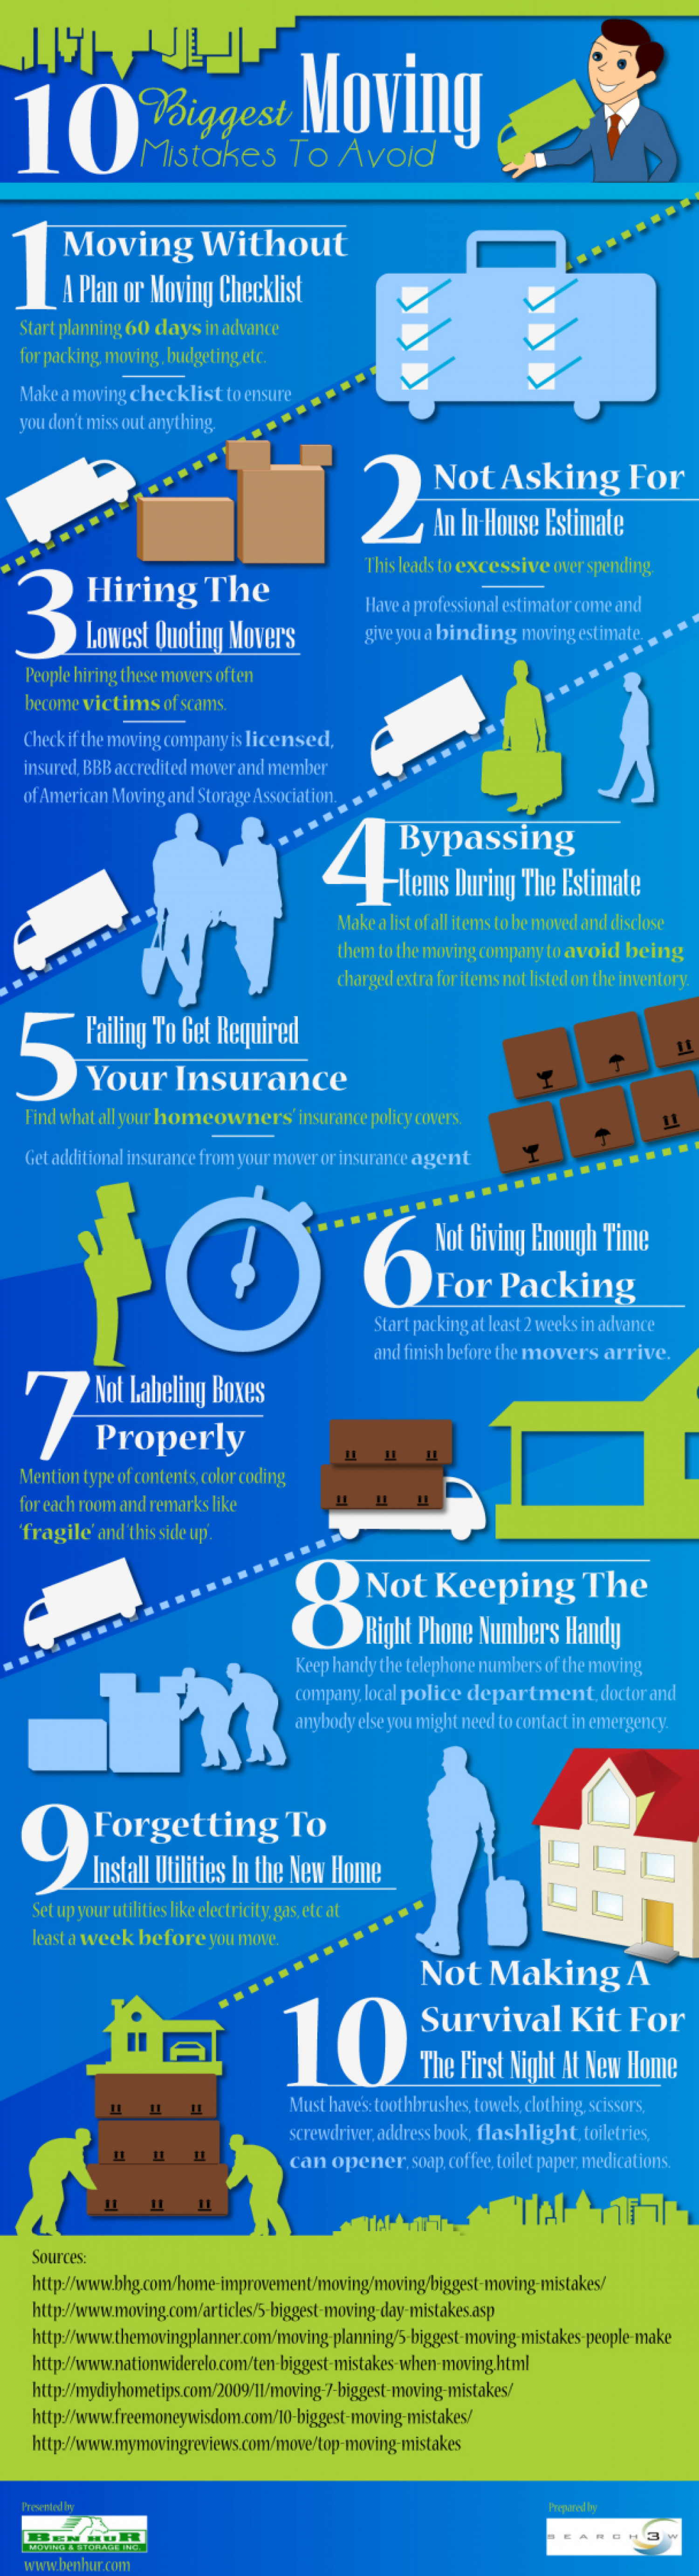 Business Infographic: 10 Biggest Moving Mistakes To Avoid